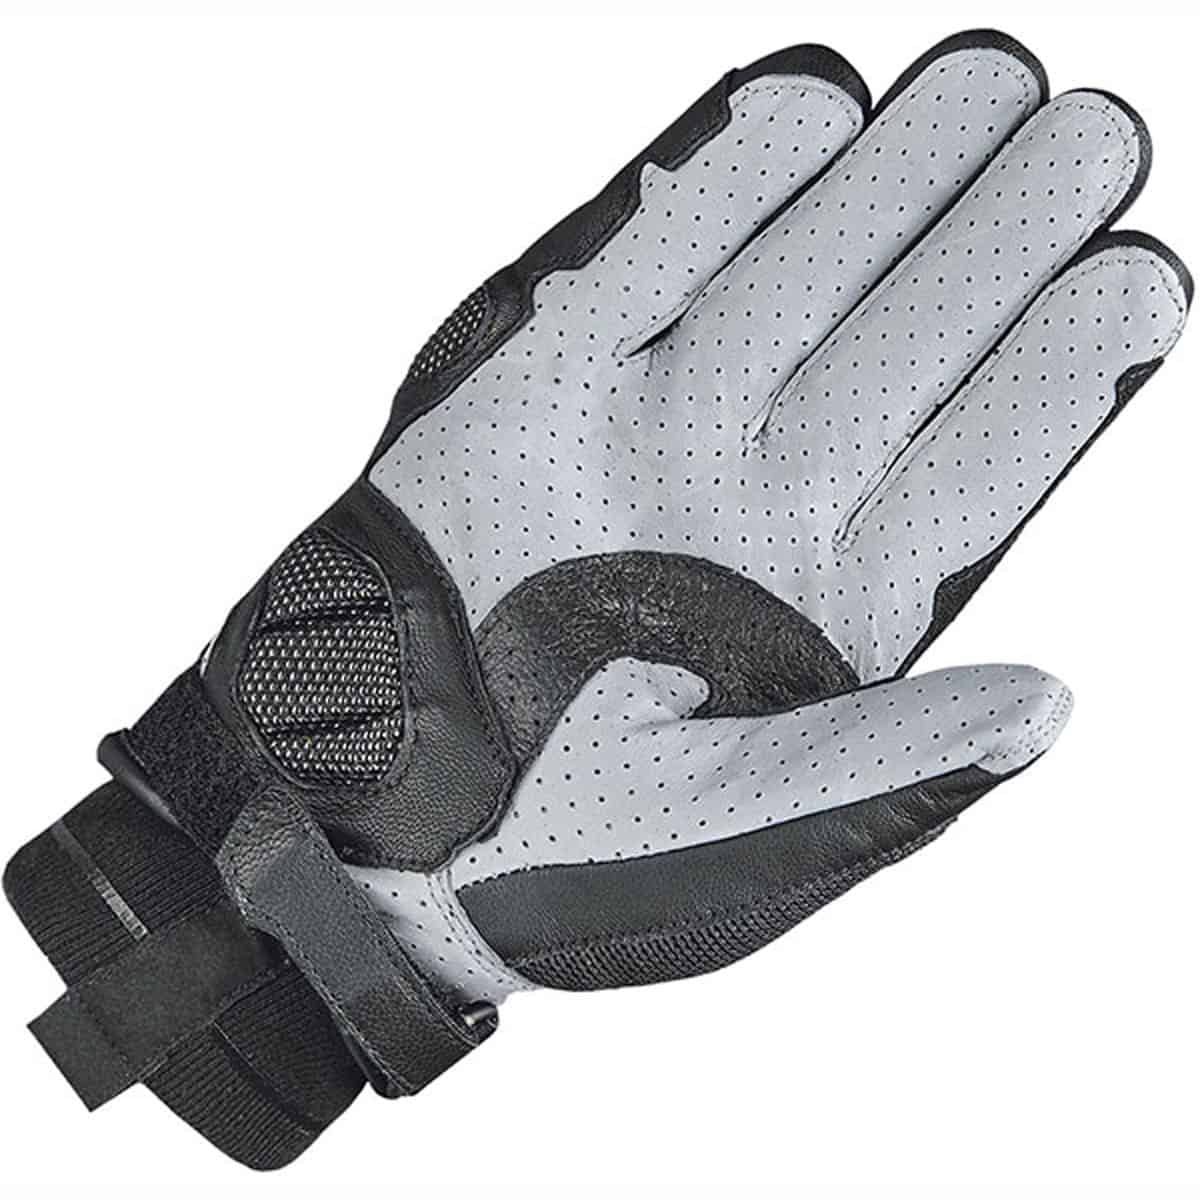 Held Sambia KTC mesh summer gloves: Extremely well-fitting summer gloves, featuring high-quality materials that will make them last you well - Palm view